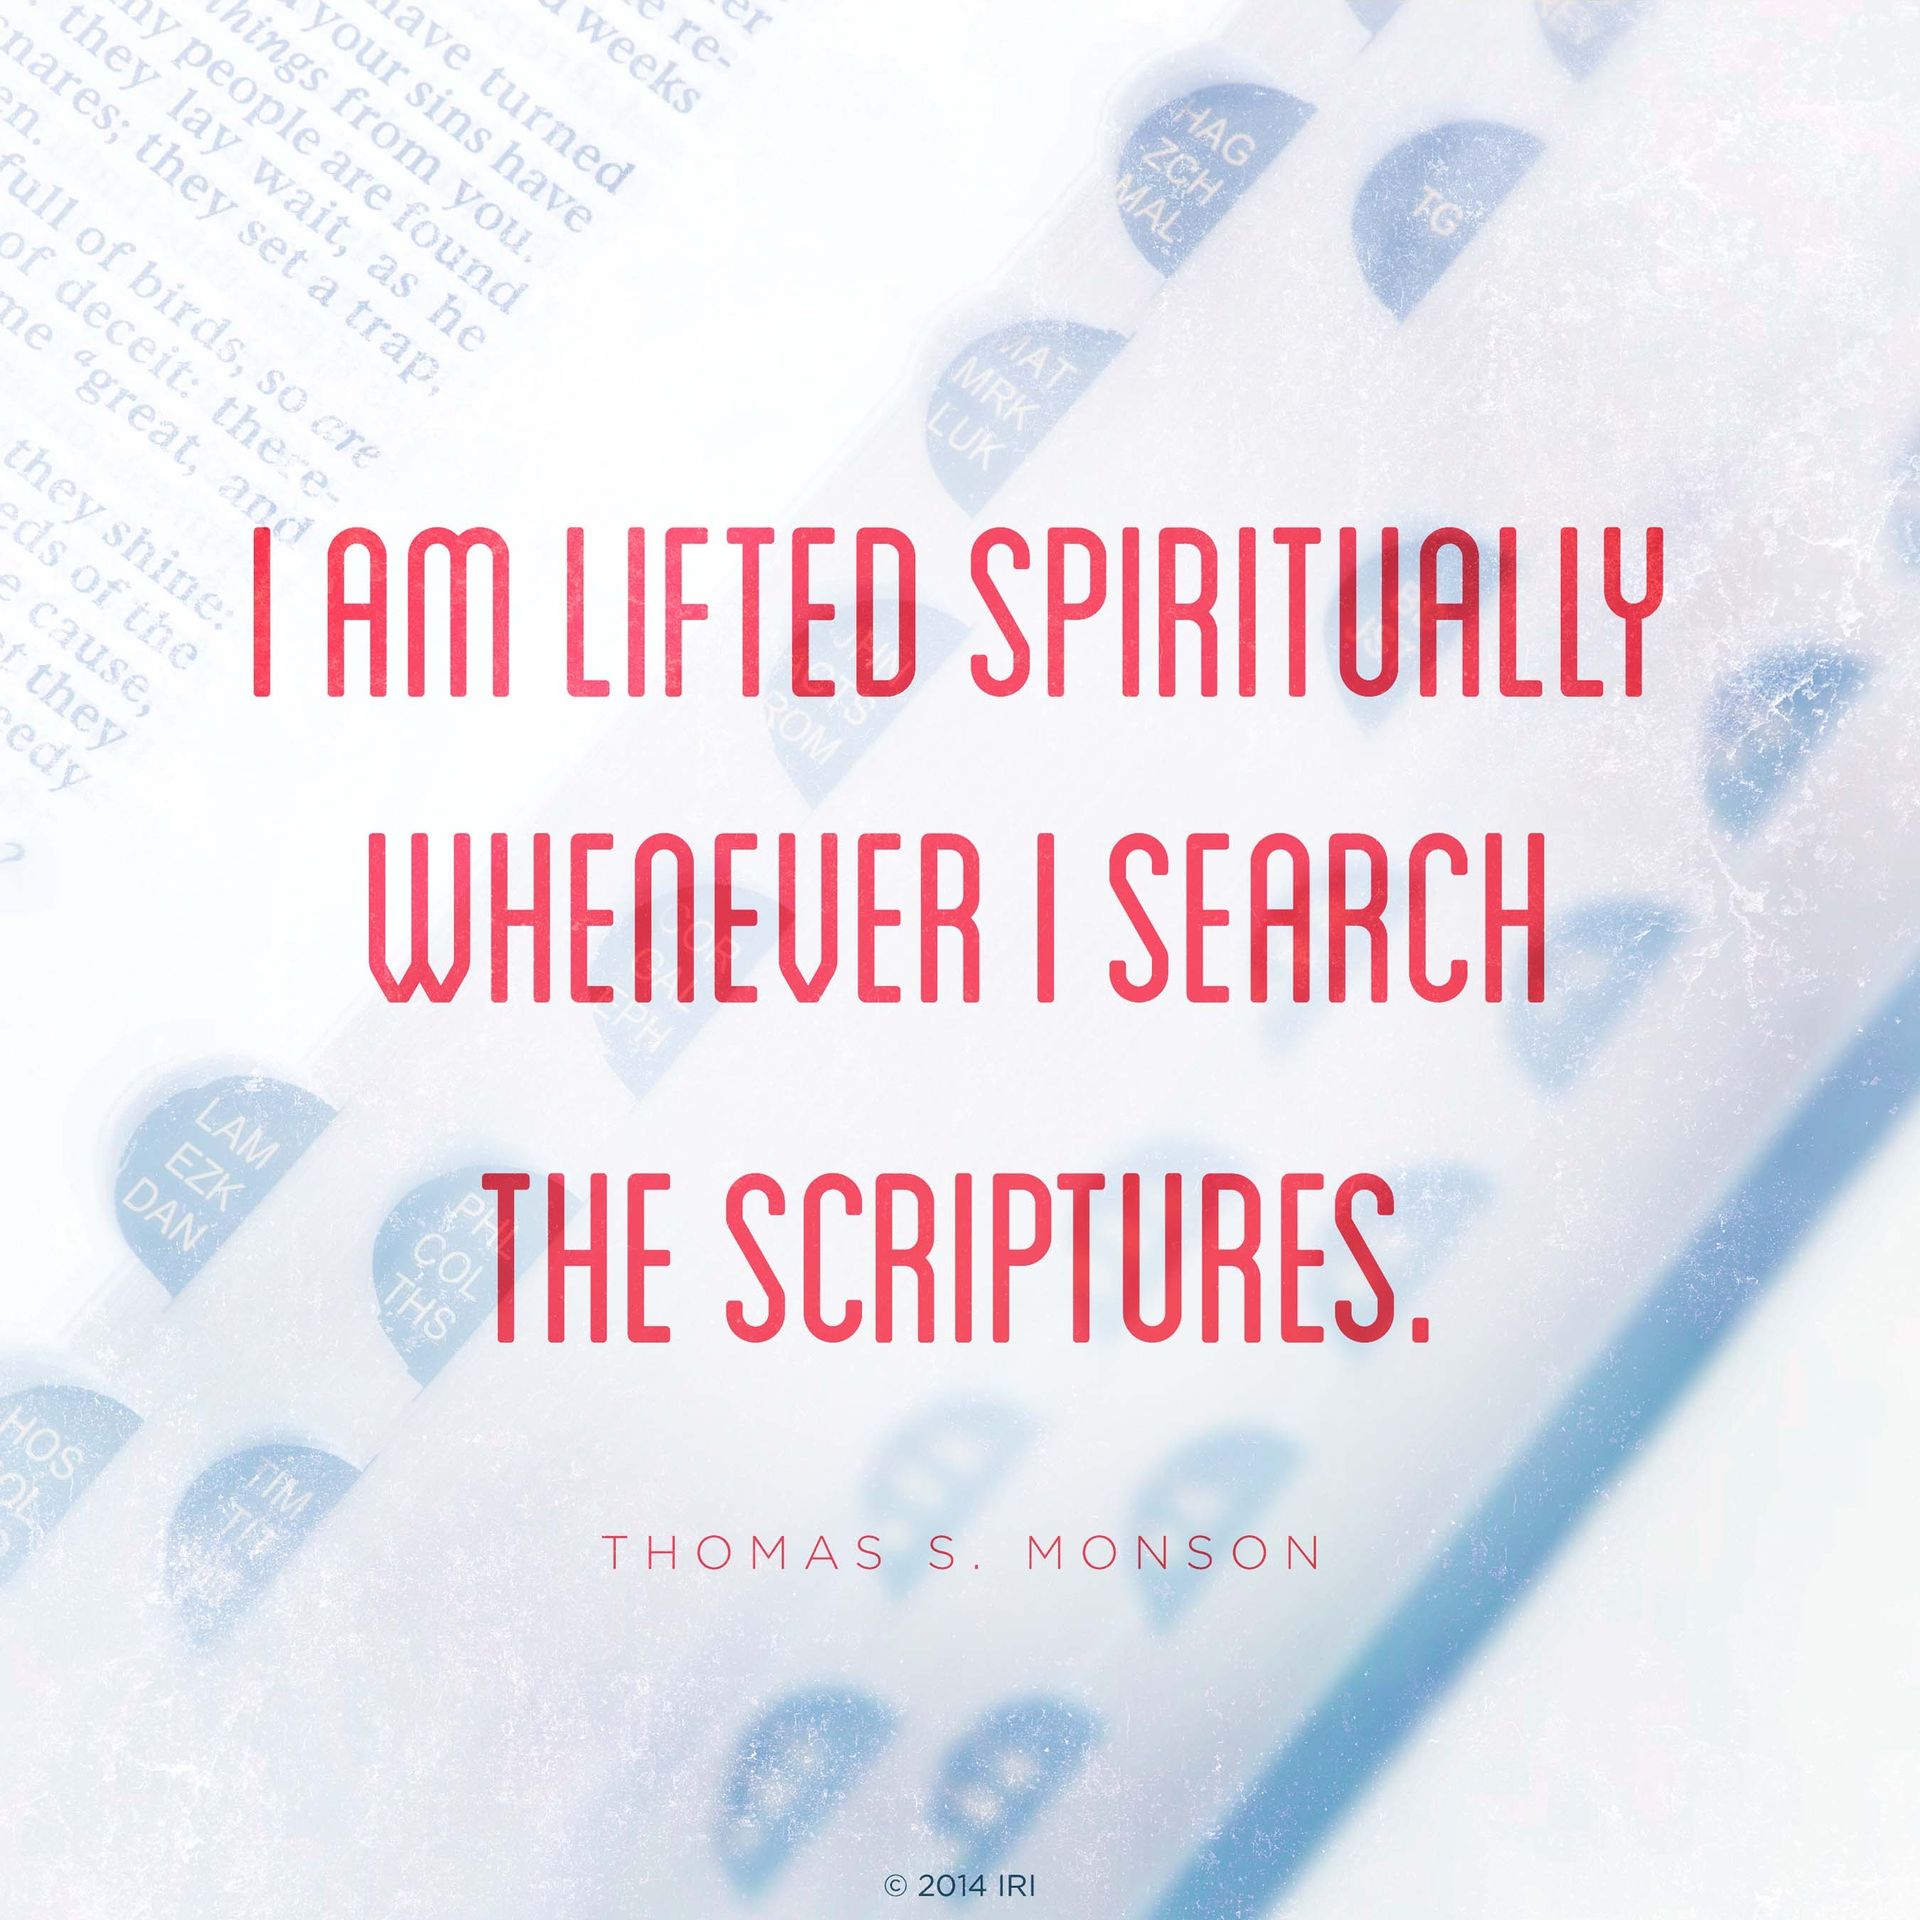 “I am lifted spiritually whenever I search the scriptures.”—President Thomas S. Monson, “We Never Walk Alone”